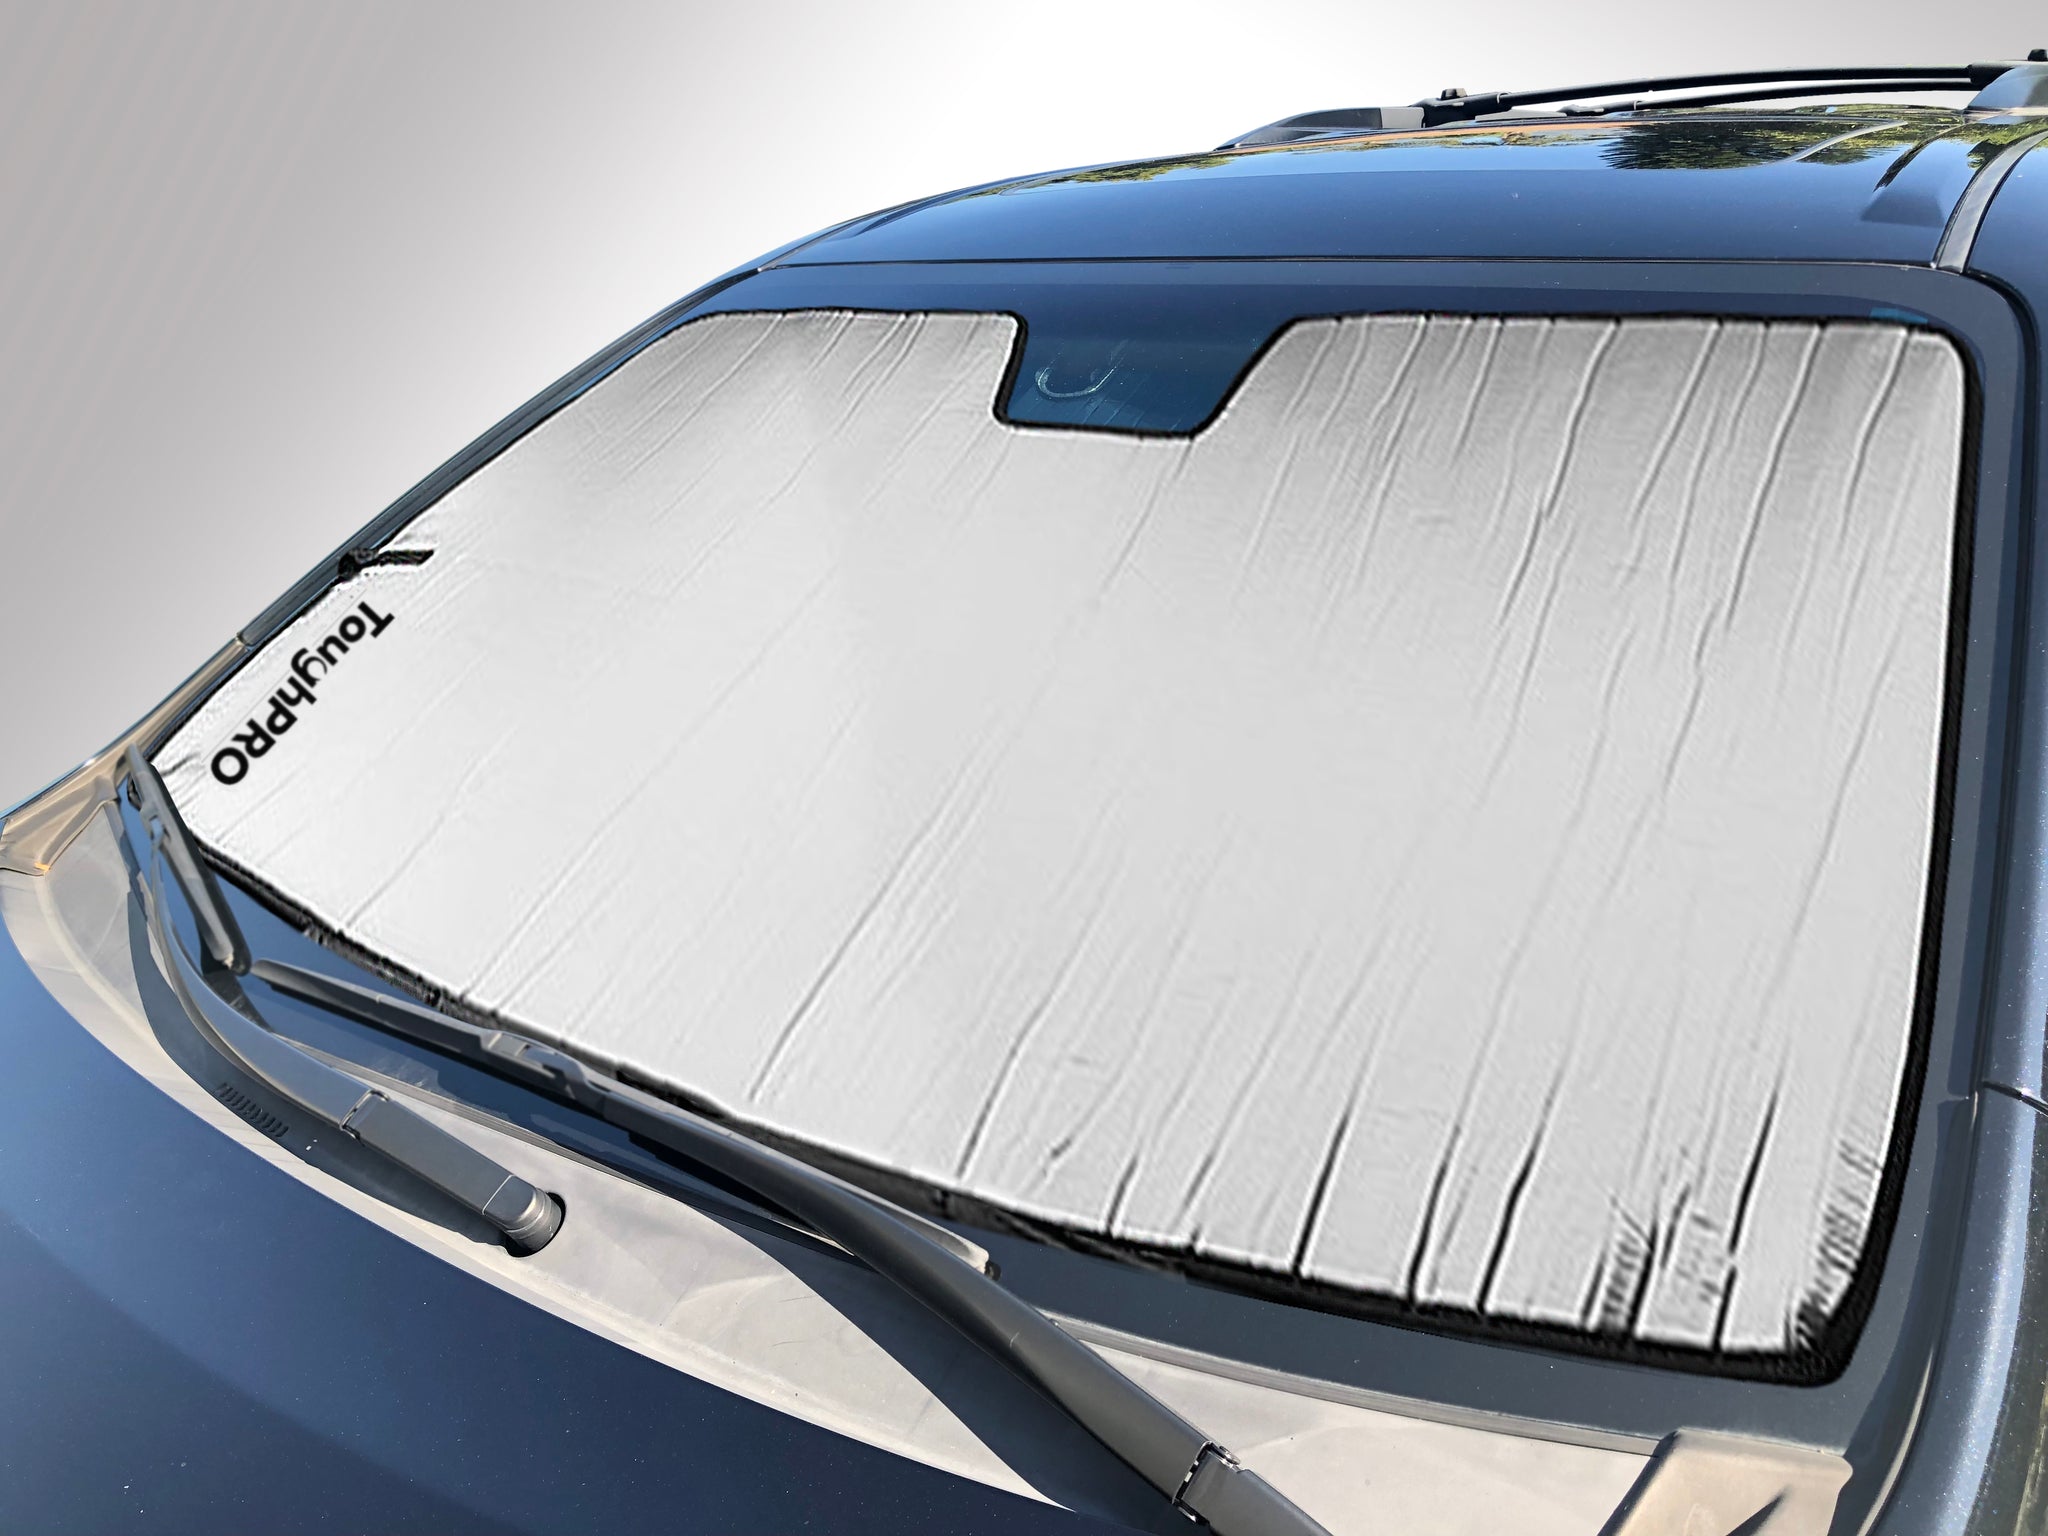 CUSTOM FIT FOR LINCOLN MKX 2016 Sun Shade